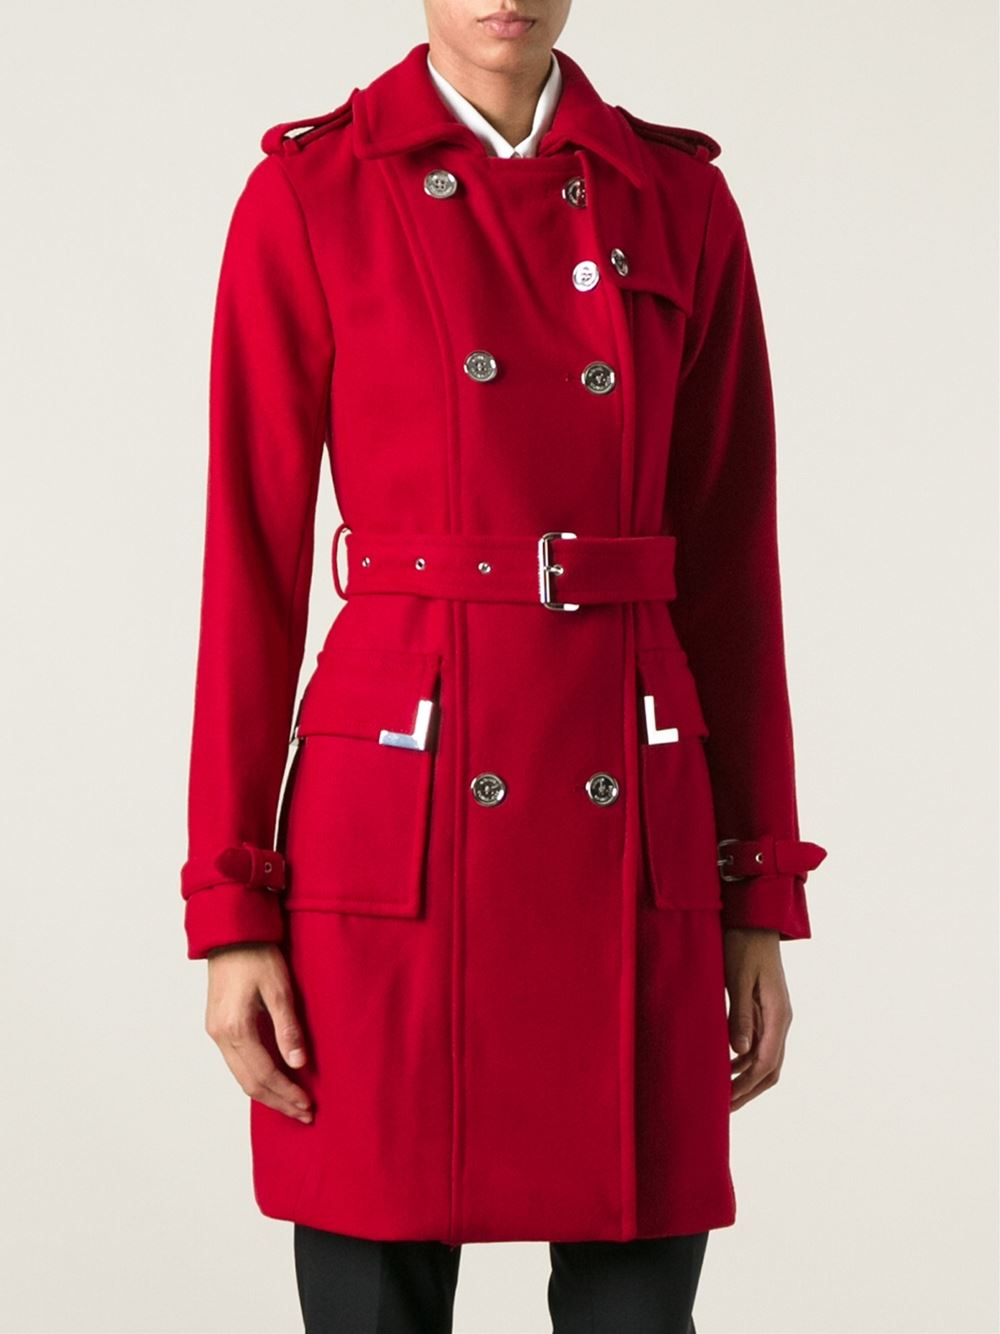 MICHAEL Michael Kors Classic Double Breasted Coat in Red - Lyst